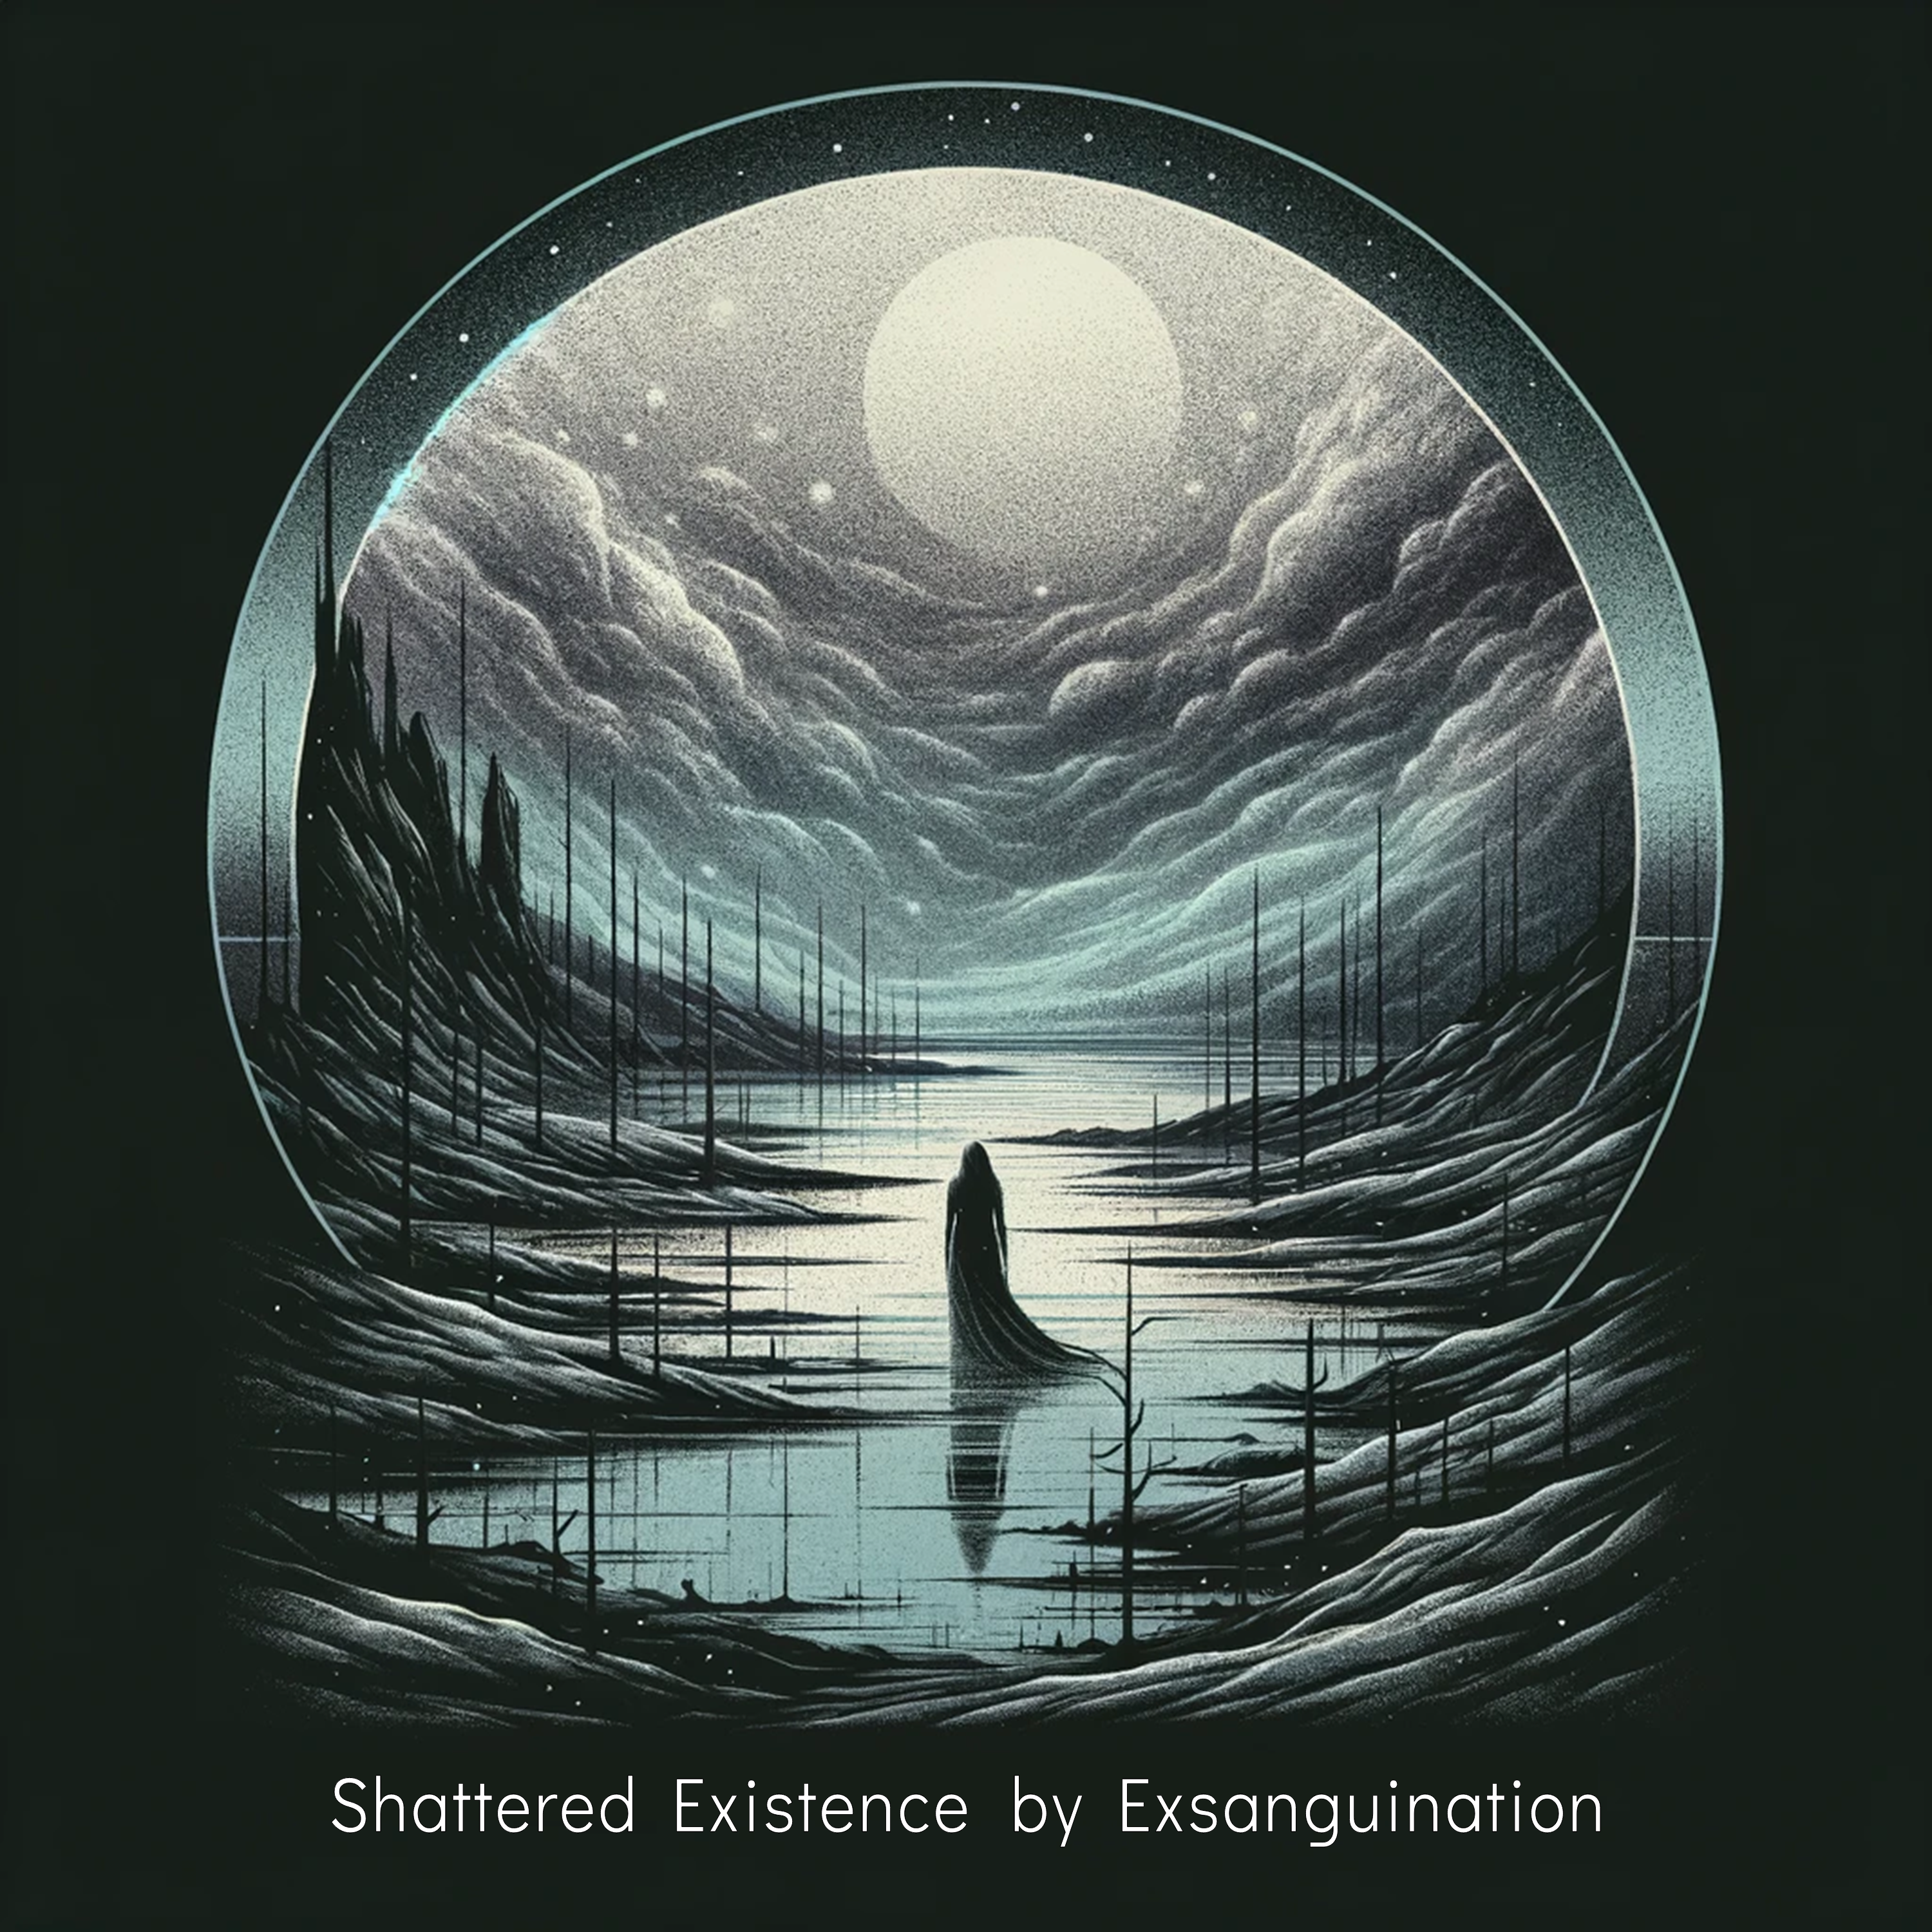 In Shattered Existence by -Exsanguination